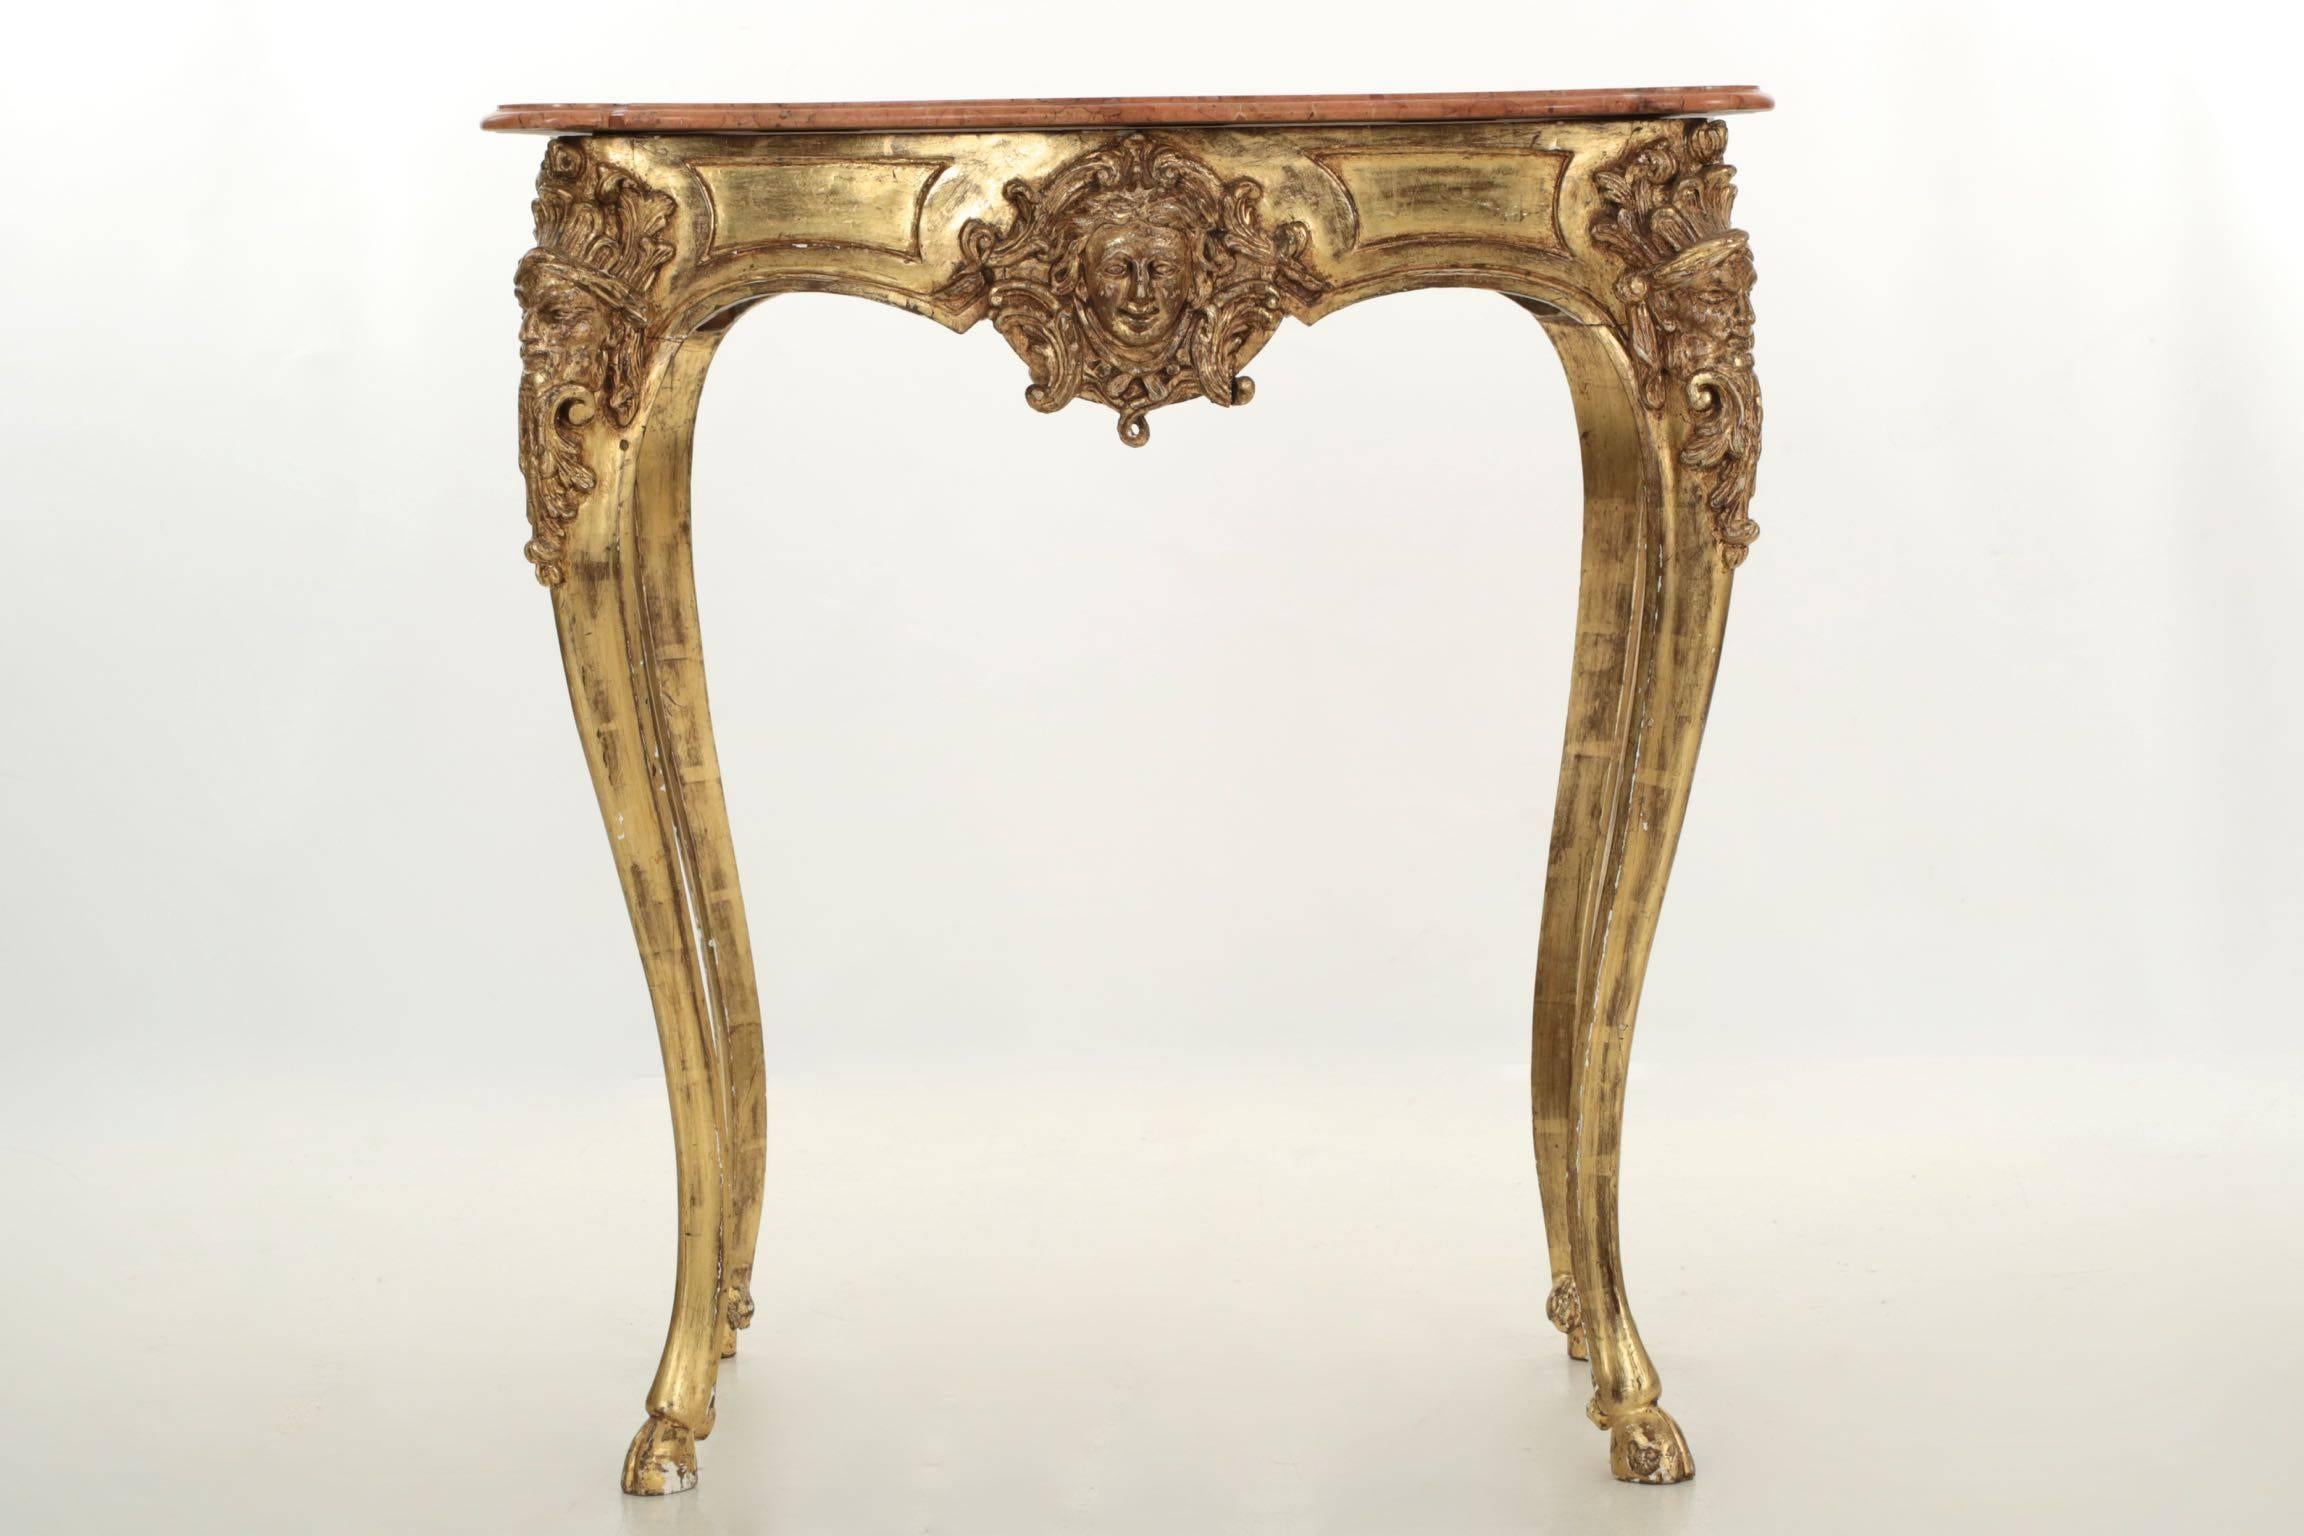 Carved Continental Rococo Giltwood and Marble Side Table with Hooved Sabots